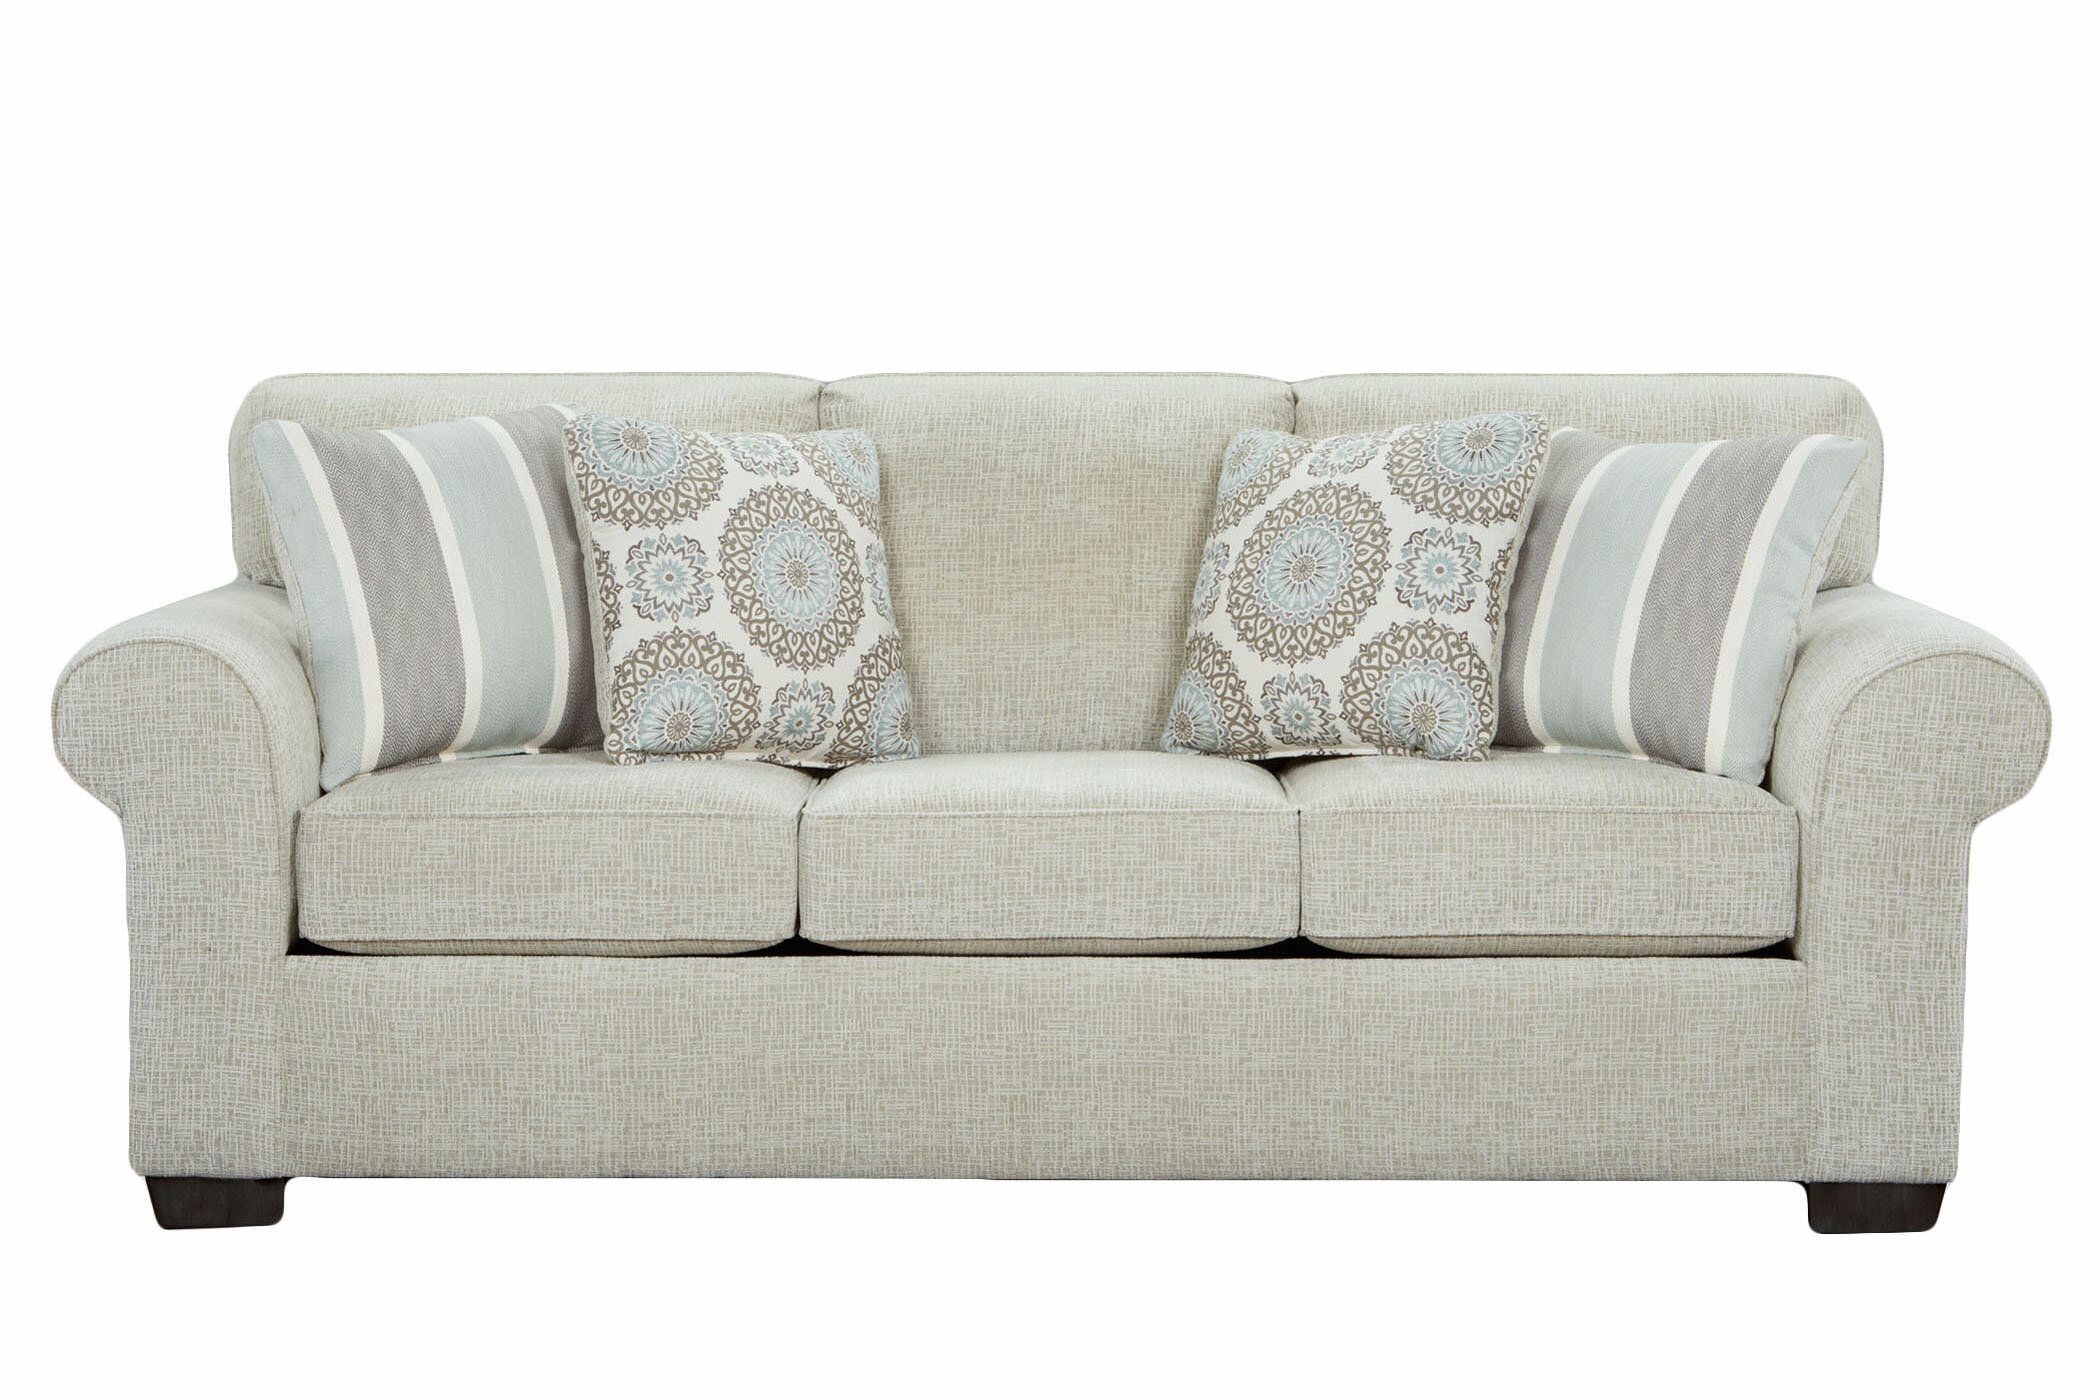 Charlton Home® Lansdale 88'' Upholstered Sofa & Reviews | Wayfair With Regard To Sofas With Curved Arms (View 5 of 15)